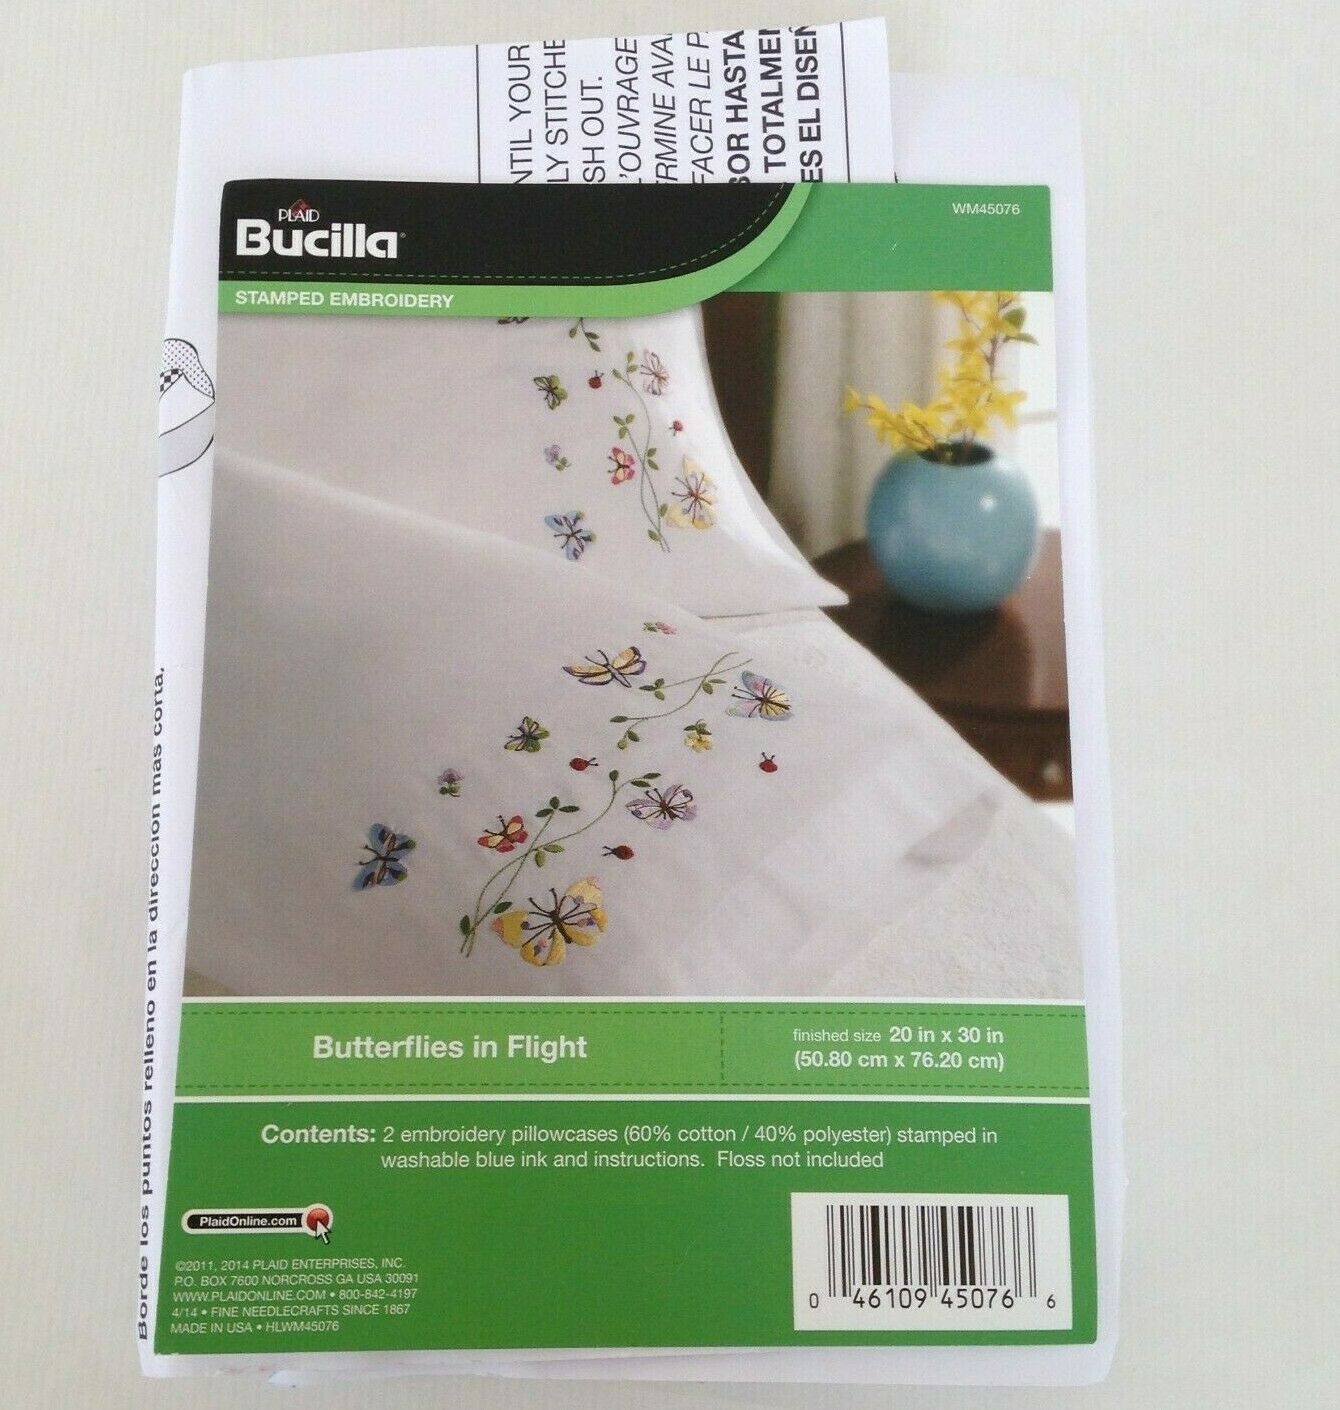 Bucilla Butterflies In Flight  Two Stamped For Embroidery Pillowcases 45076